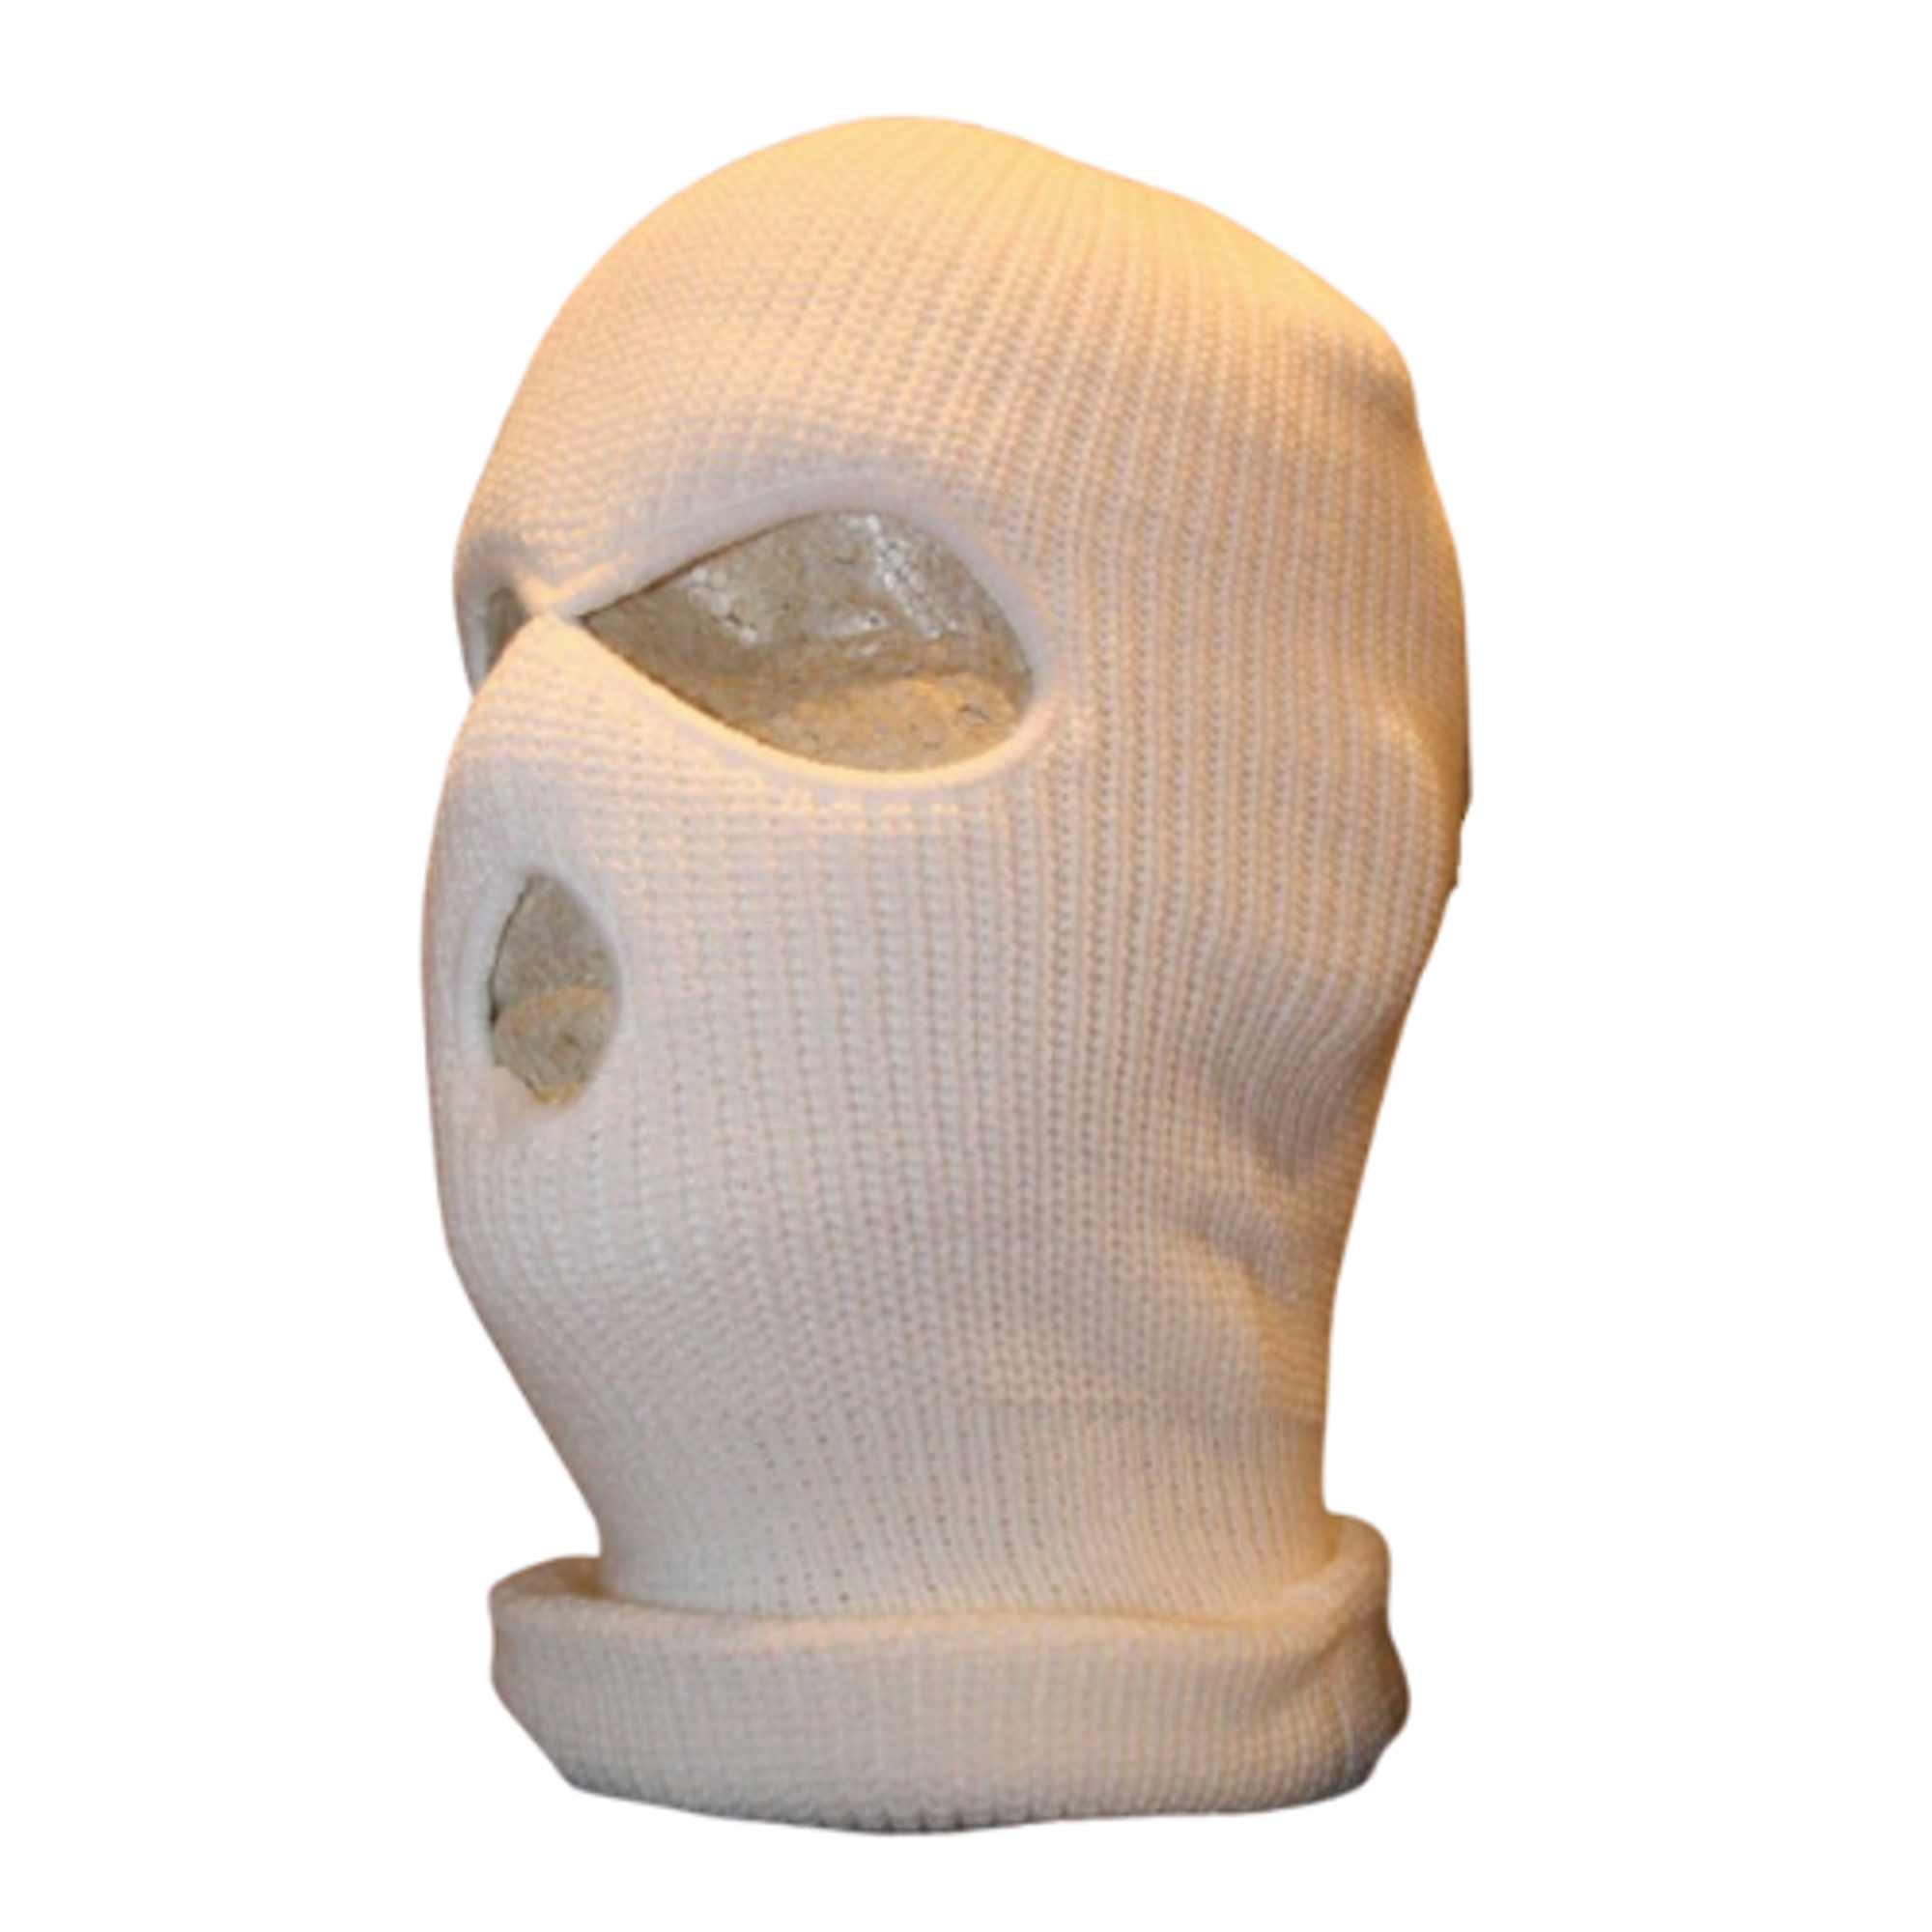 Canadian Armed Forces Balaclava - White